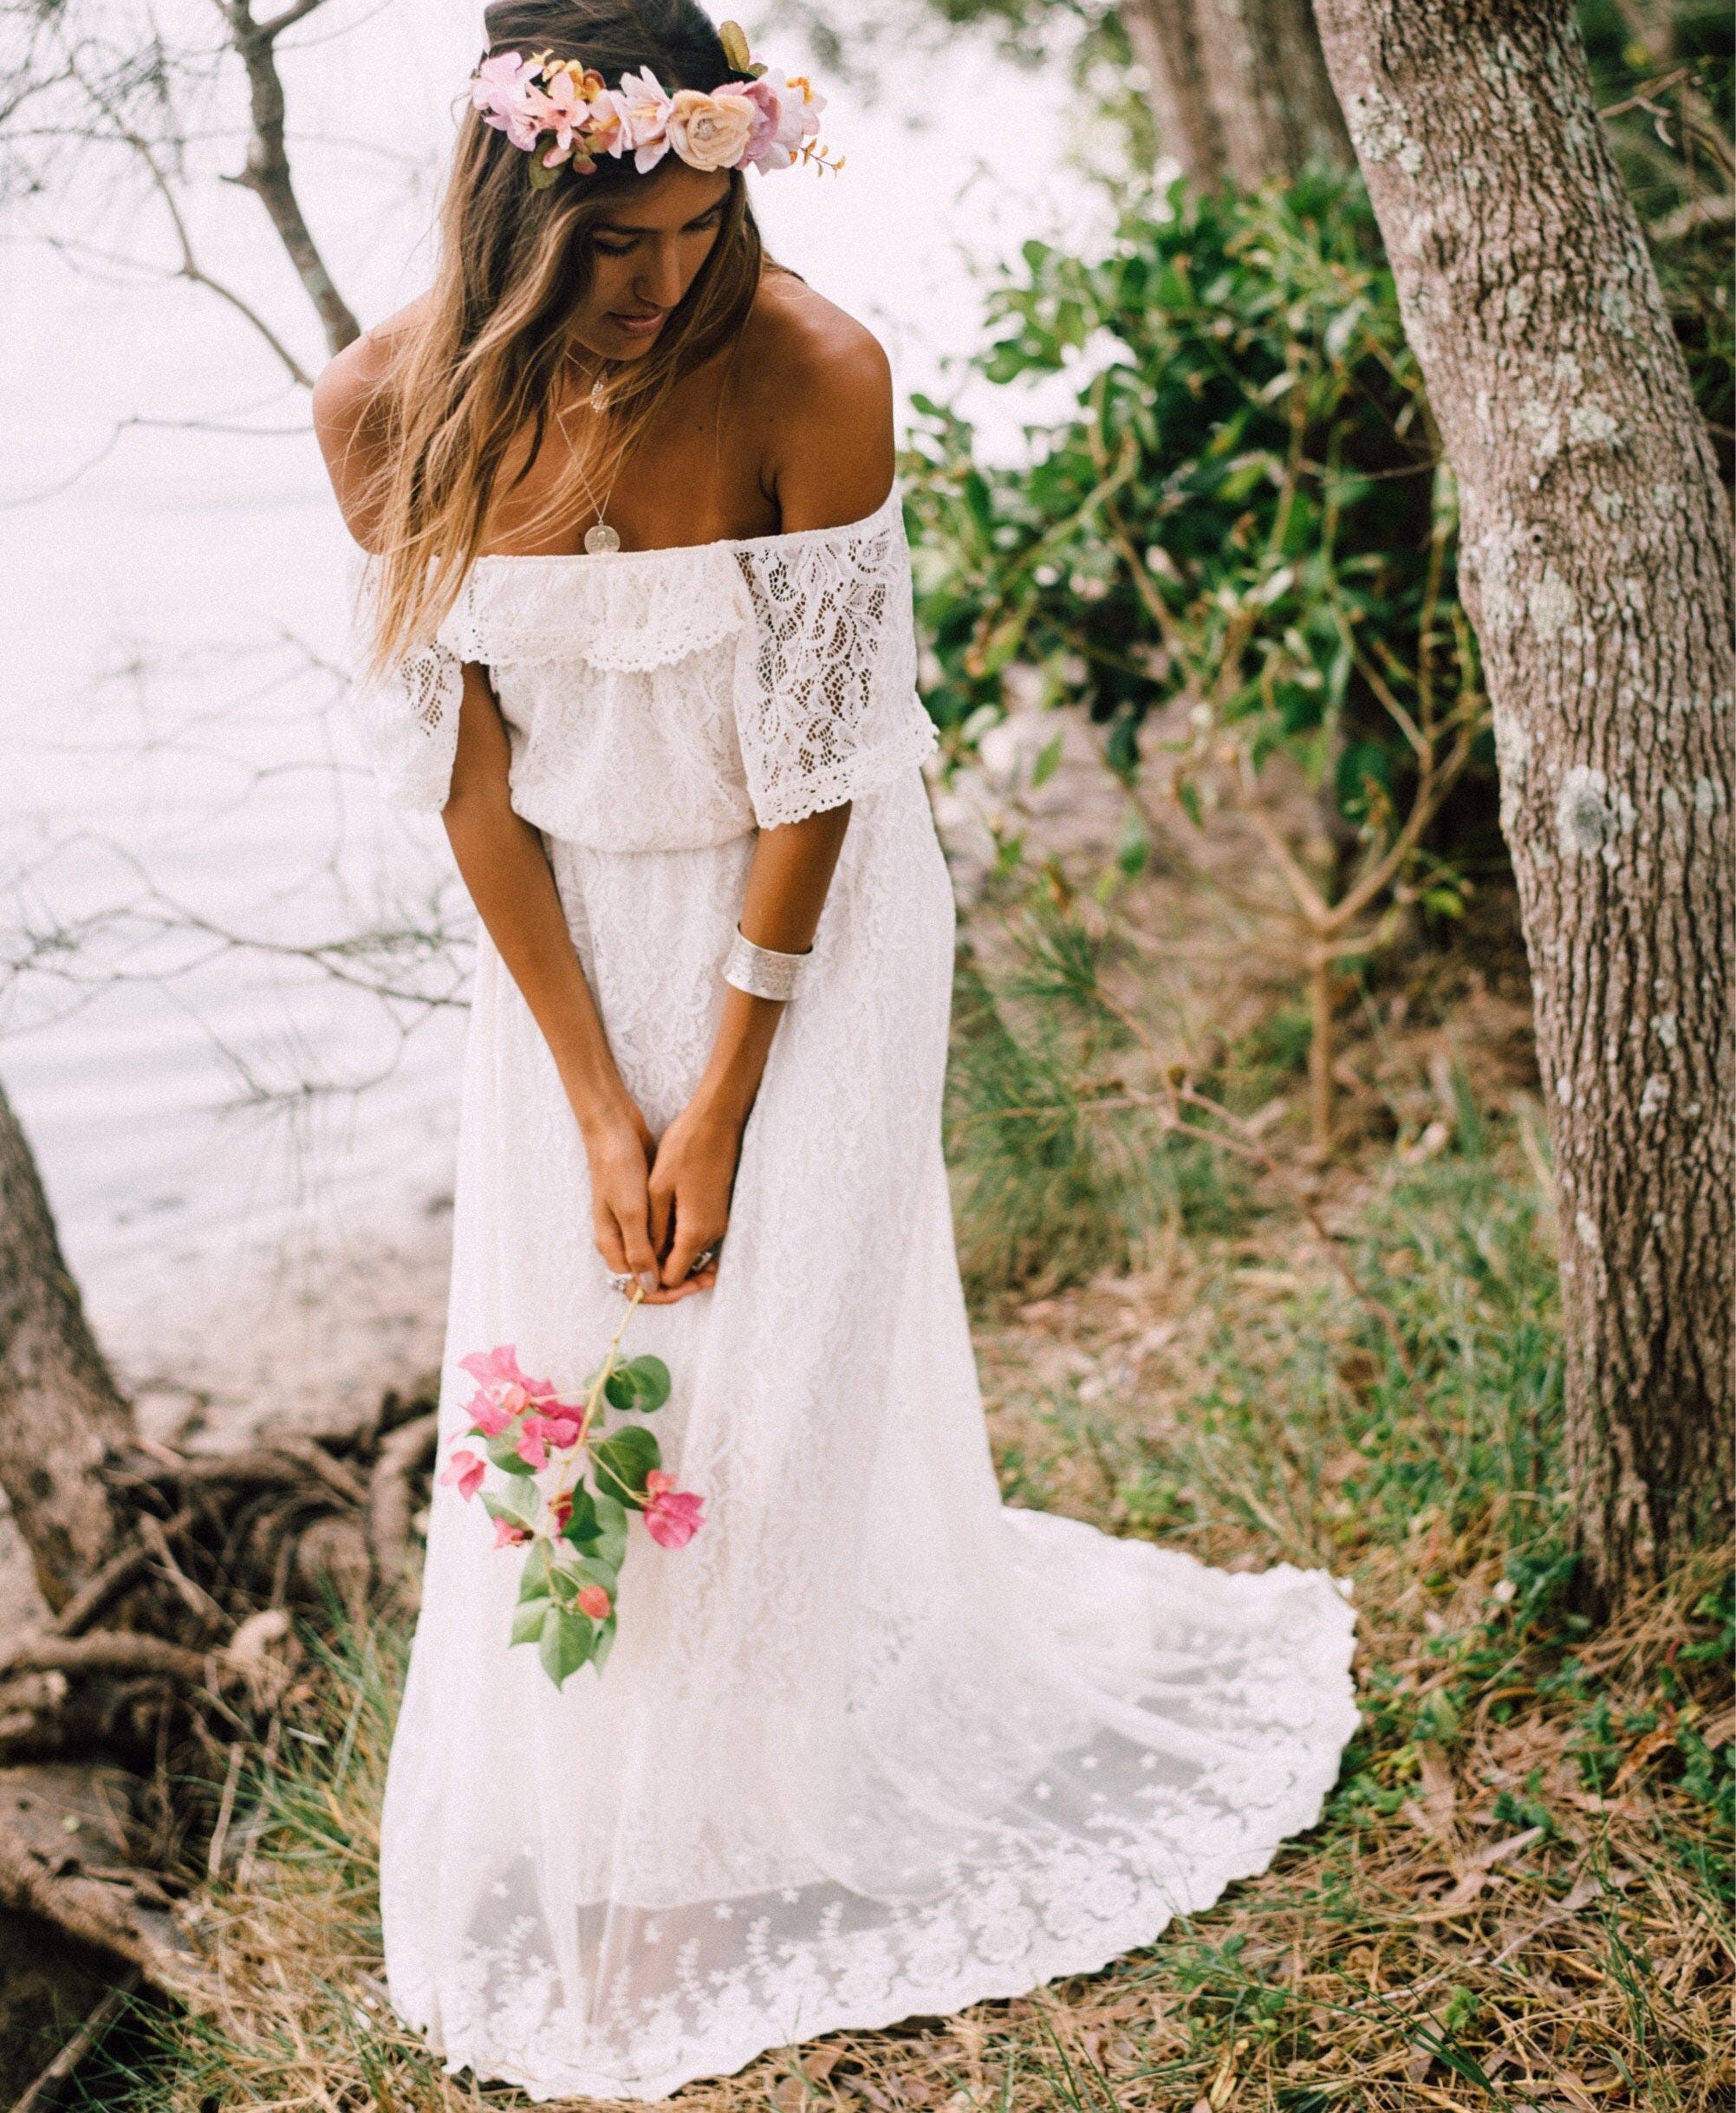 Bridal Style Inspiration: Vintage Glam in the South of France